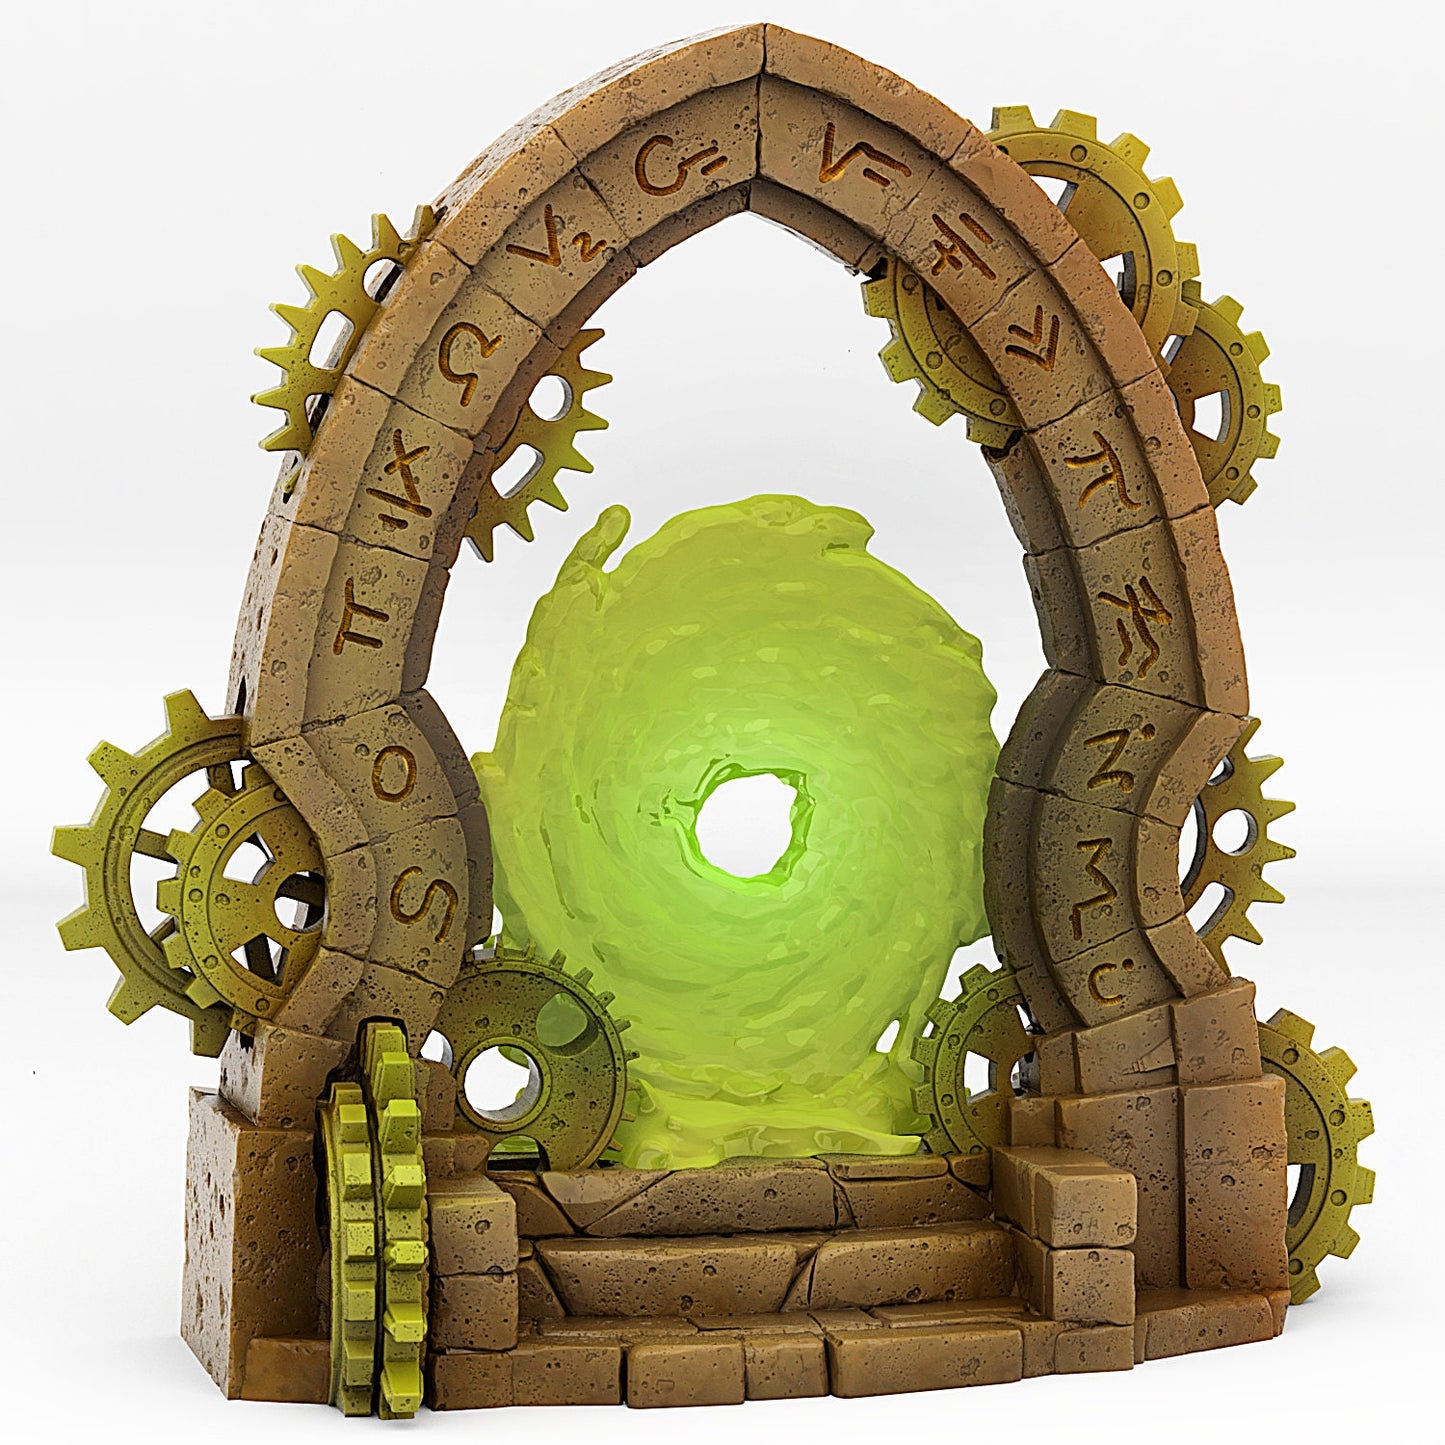 Clockwork Portal | Scenery and terrain | 3D Printed Resin Miniature | Tabletop Role Playing | AoS | D&D | 40K | Pathfinder